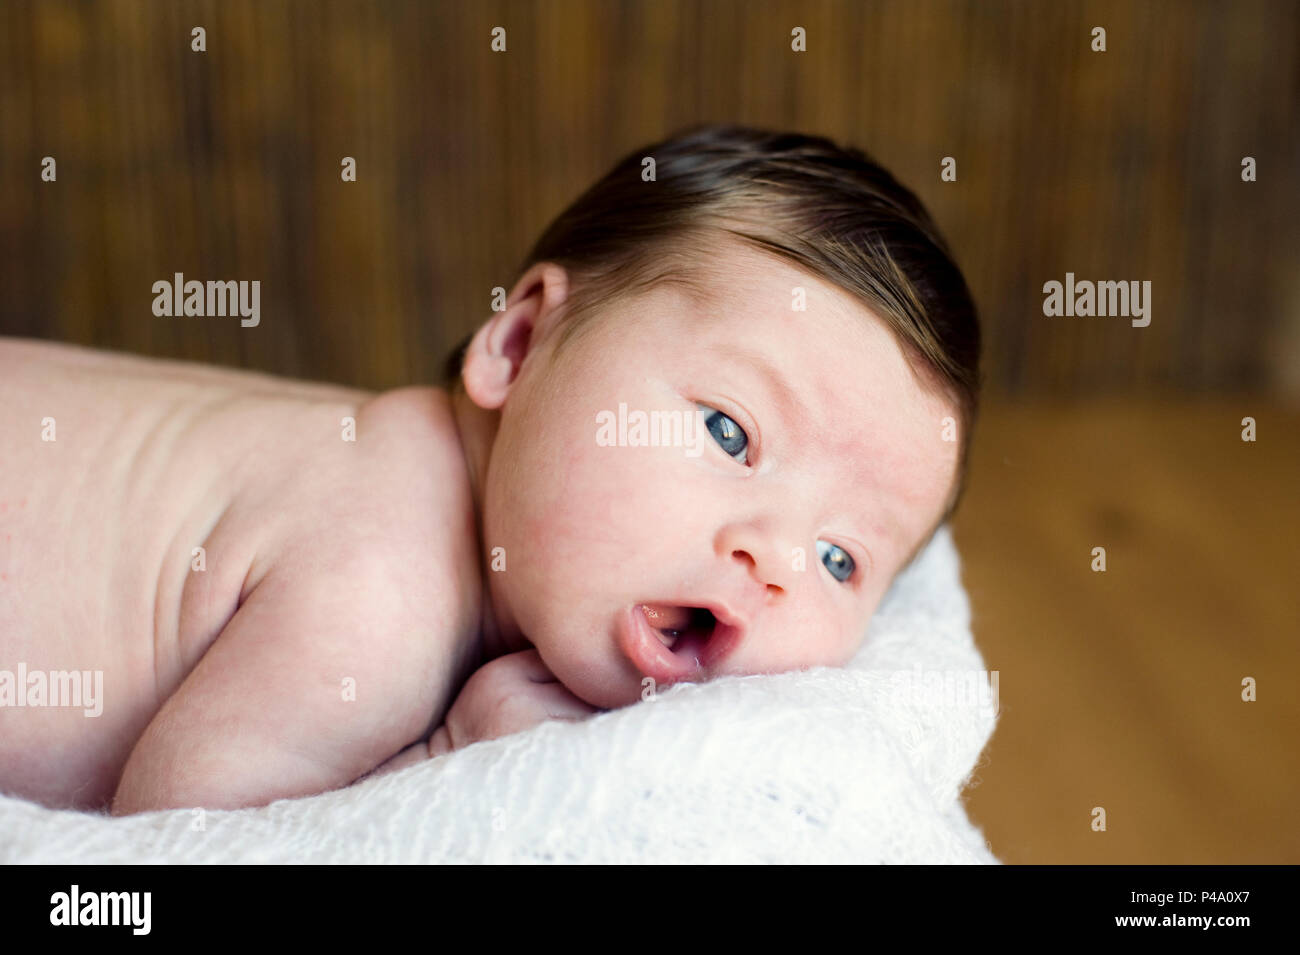 Adorable beautiful newborn baby looking up with a look of wonderment. Stock Photo